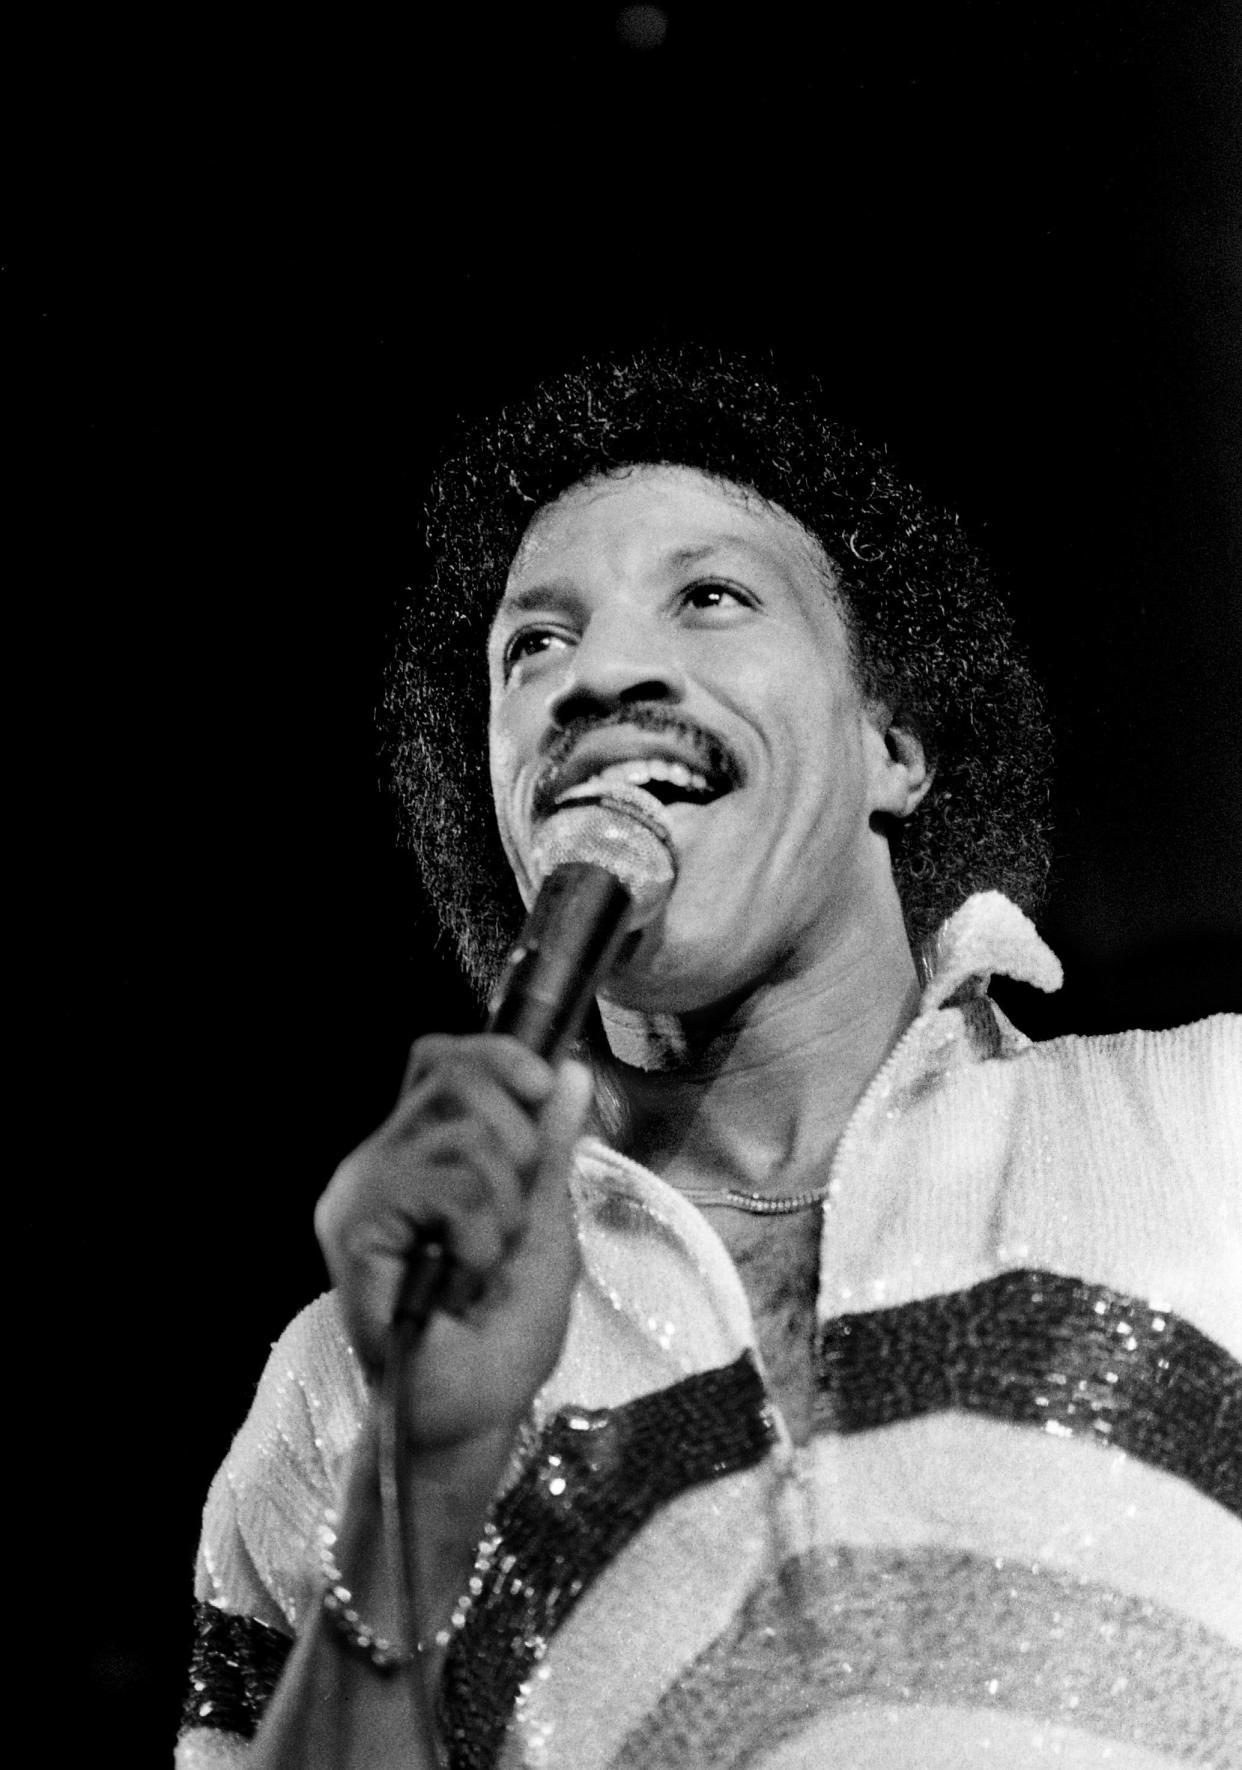 Lionel Richie proved himself to be the consummate entertainer during his concert at Murphy Center on MTSU campus in Murfreesboro, Tenn, on Oct. 19, 1983. The near-capacity crowd was on its feet in a frenzy of wild clapping, stomping and cheering.